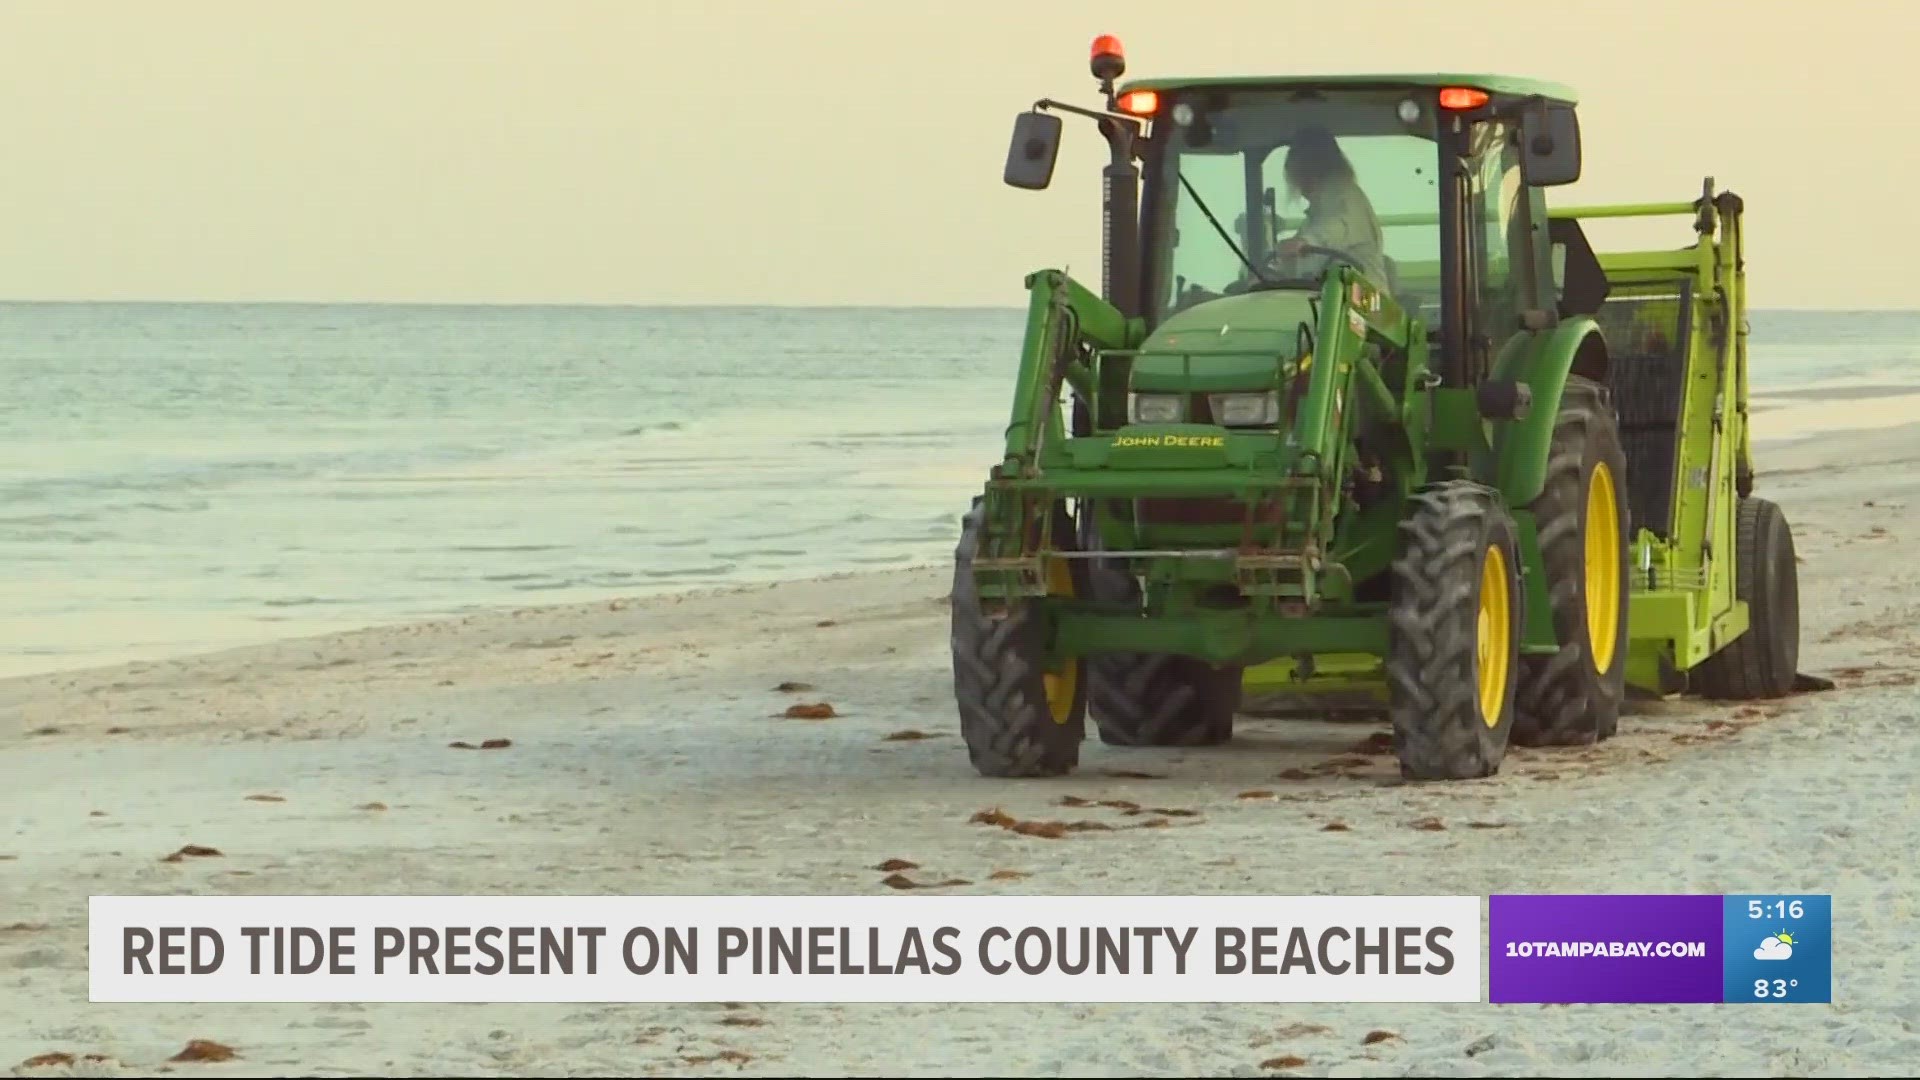 In the last week and a half, the city of Indian Rocks Beach has sent clean-up crews to the beaches every morning for red tide debris removal.